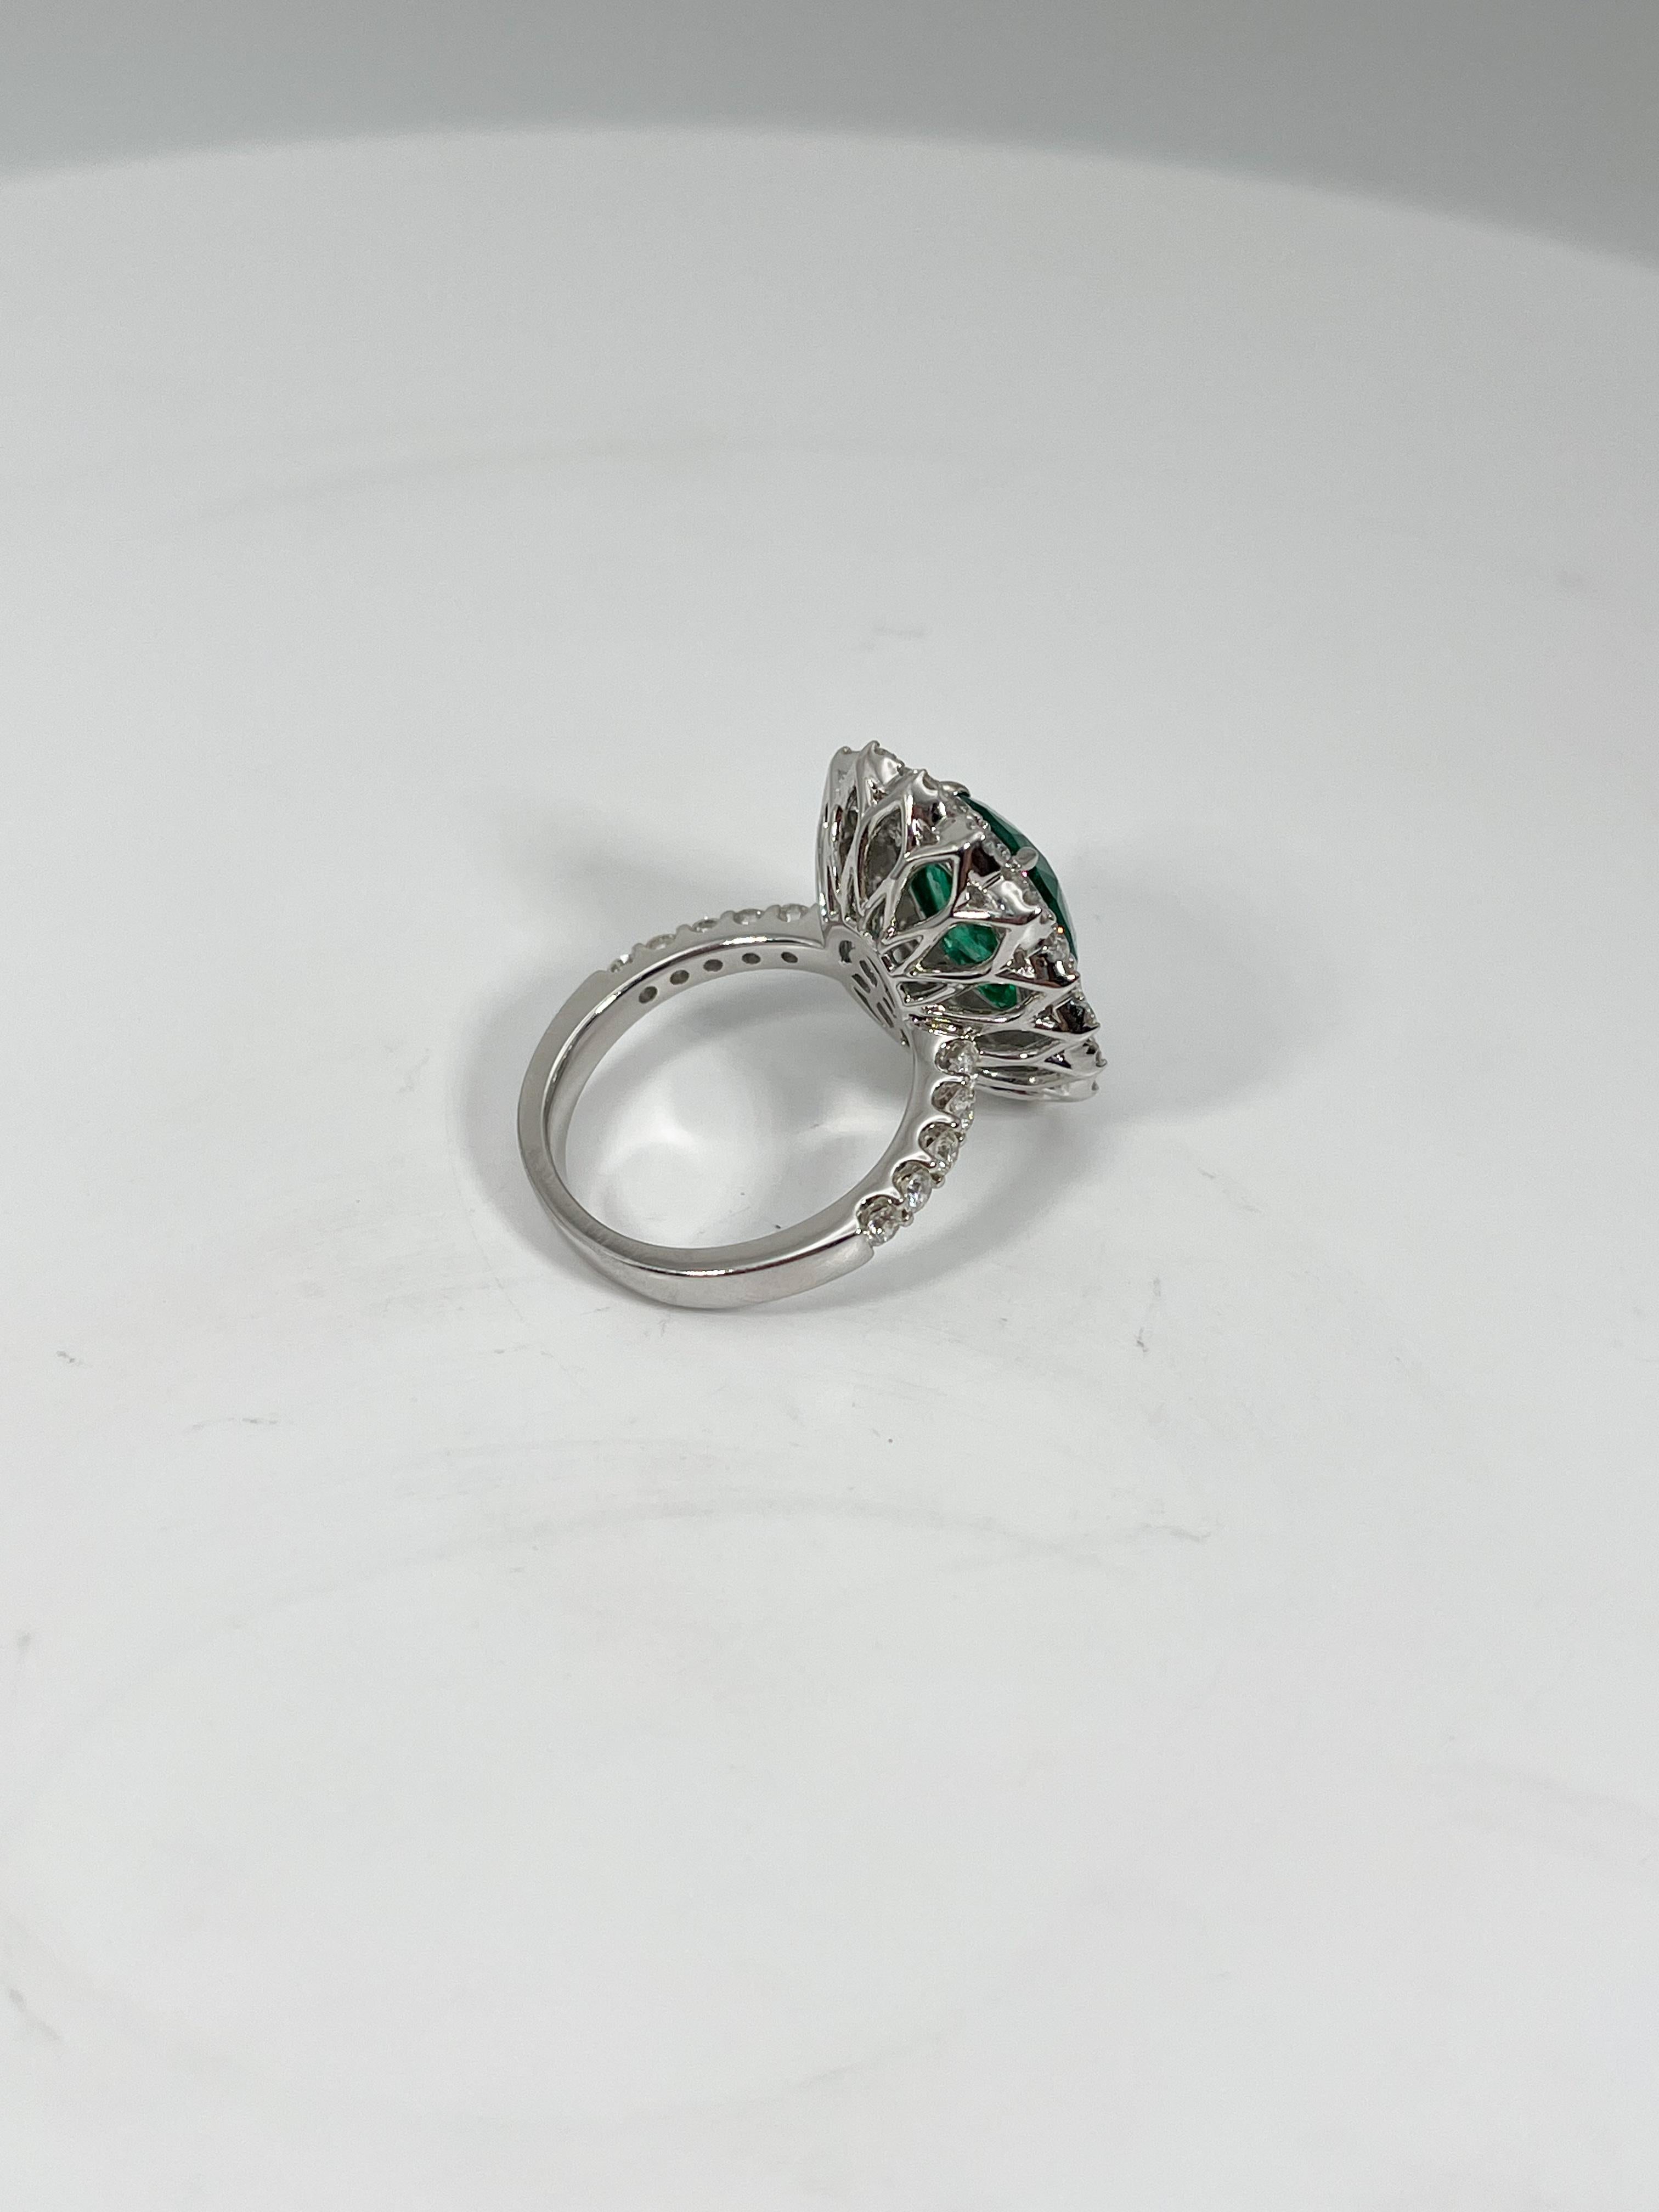 18K White Gold Ring with 3.93 CT Emerald and 1.84 CTW Diamonds In Good Condition For Sale In Stuart, FL